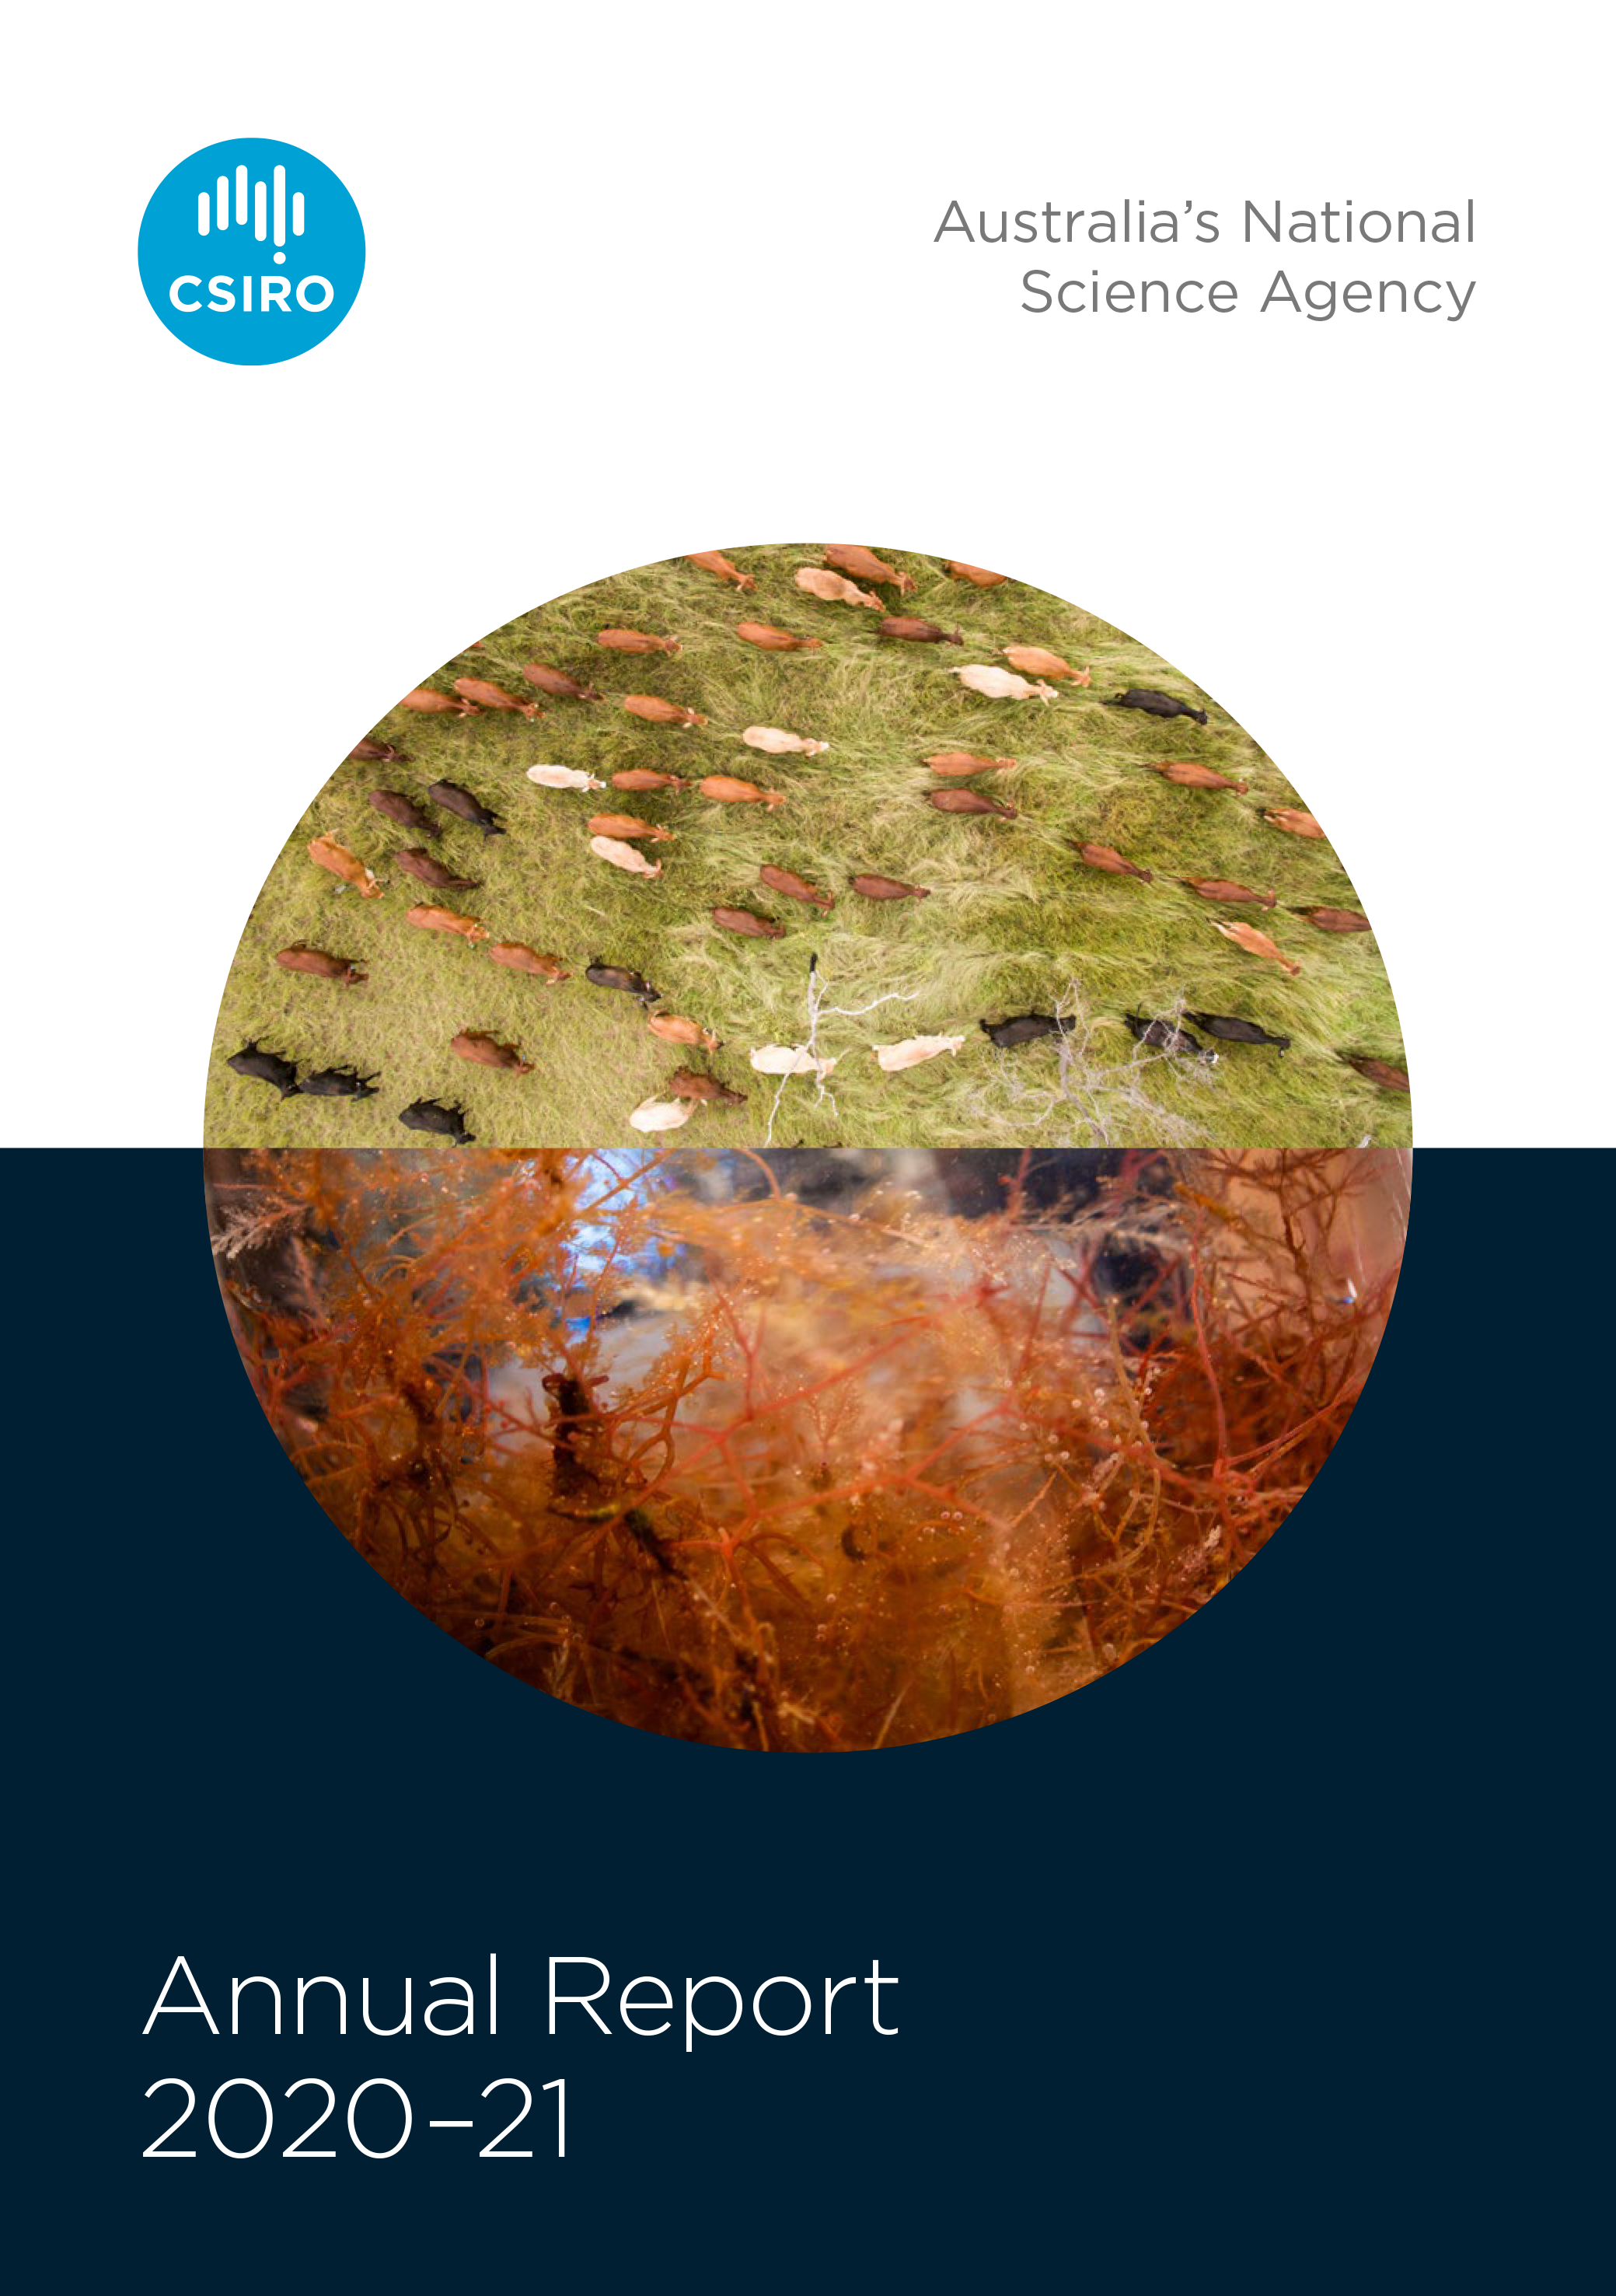 Front cover of the Annual Report showing images of cows in a field and close up of seaweed under a microscope